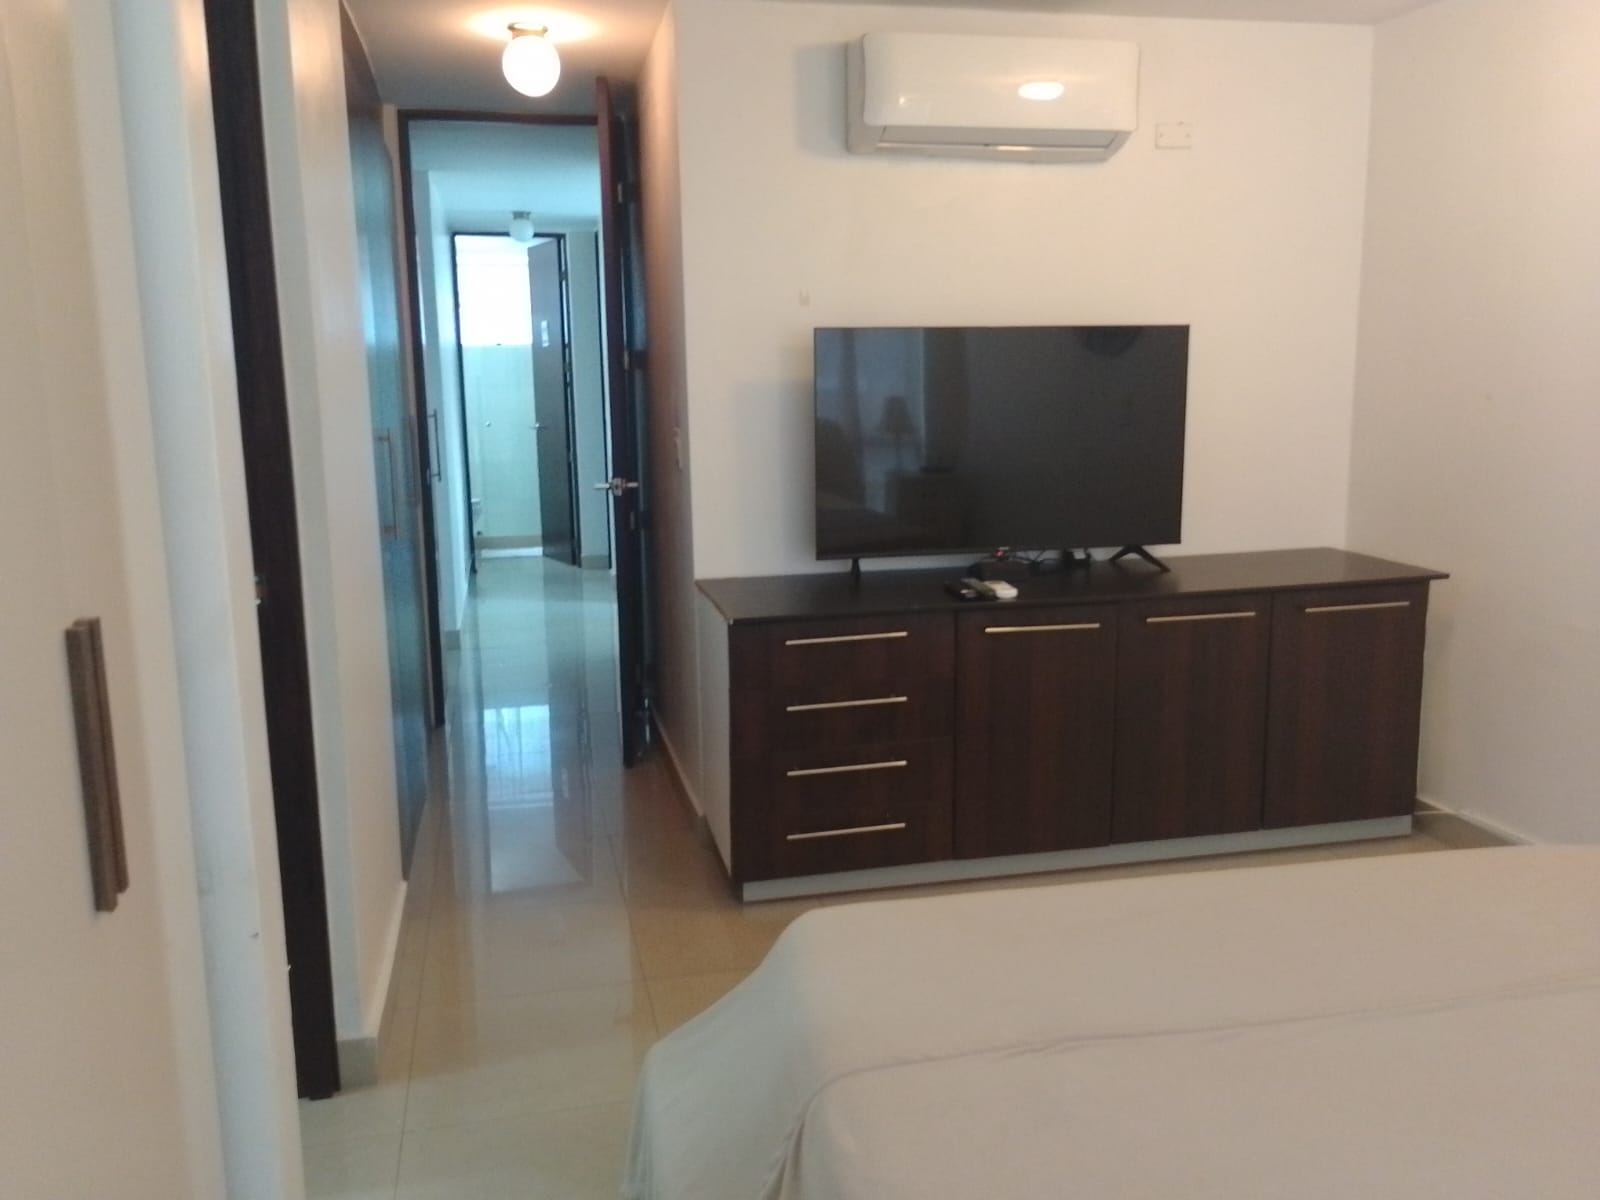 Turn-Key 139 sqm Apartment in PH Pijao, Costa del Este - PLS-19932 | Fully Furnished with Modern Amenities